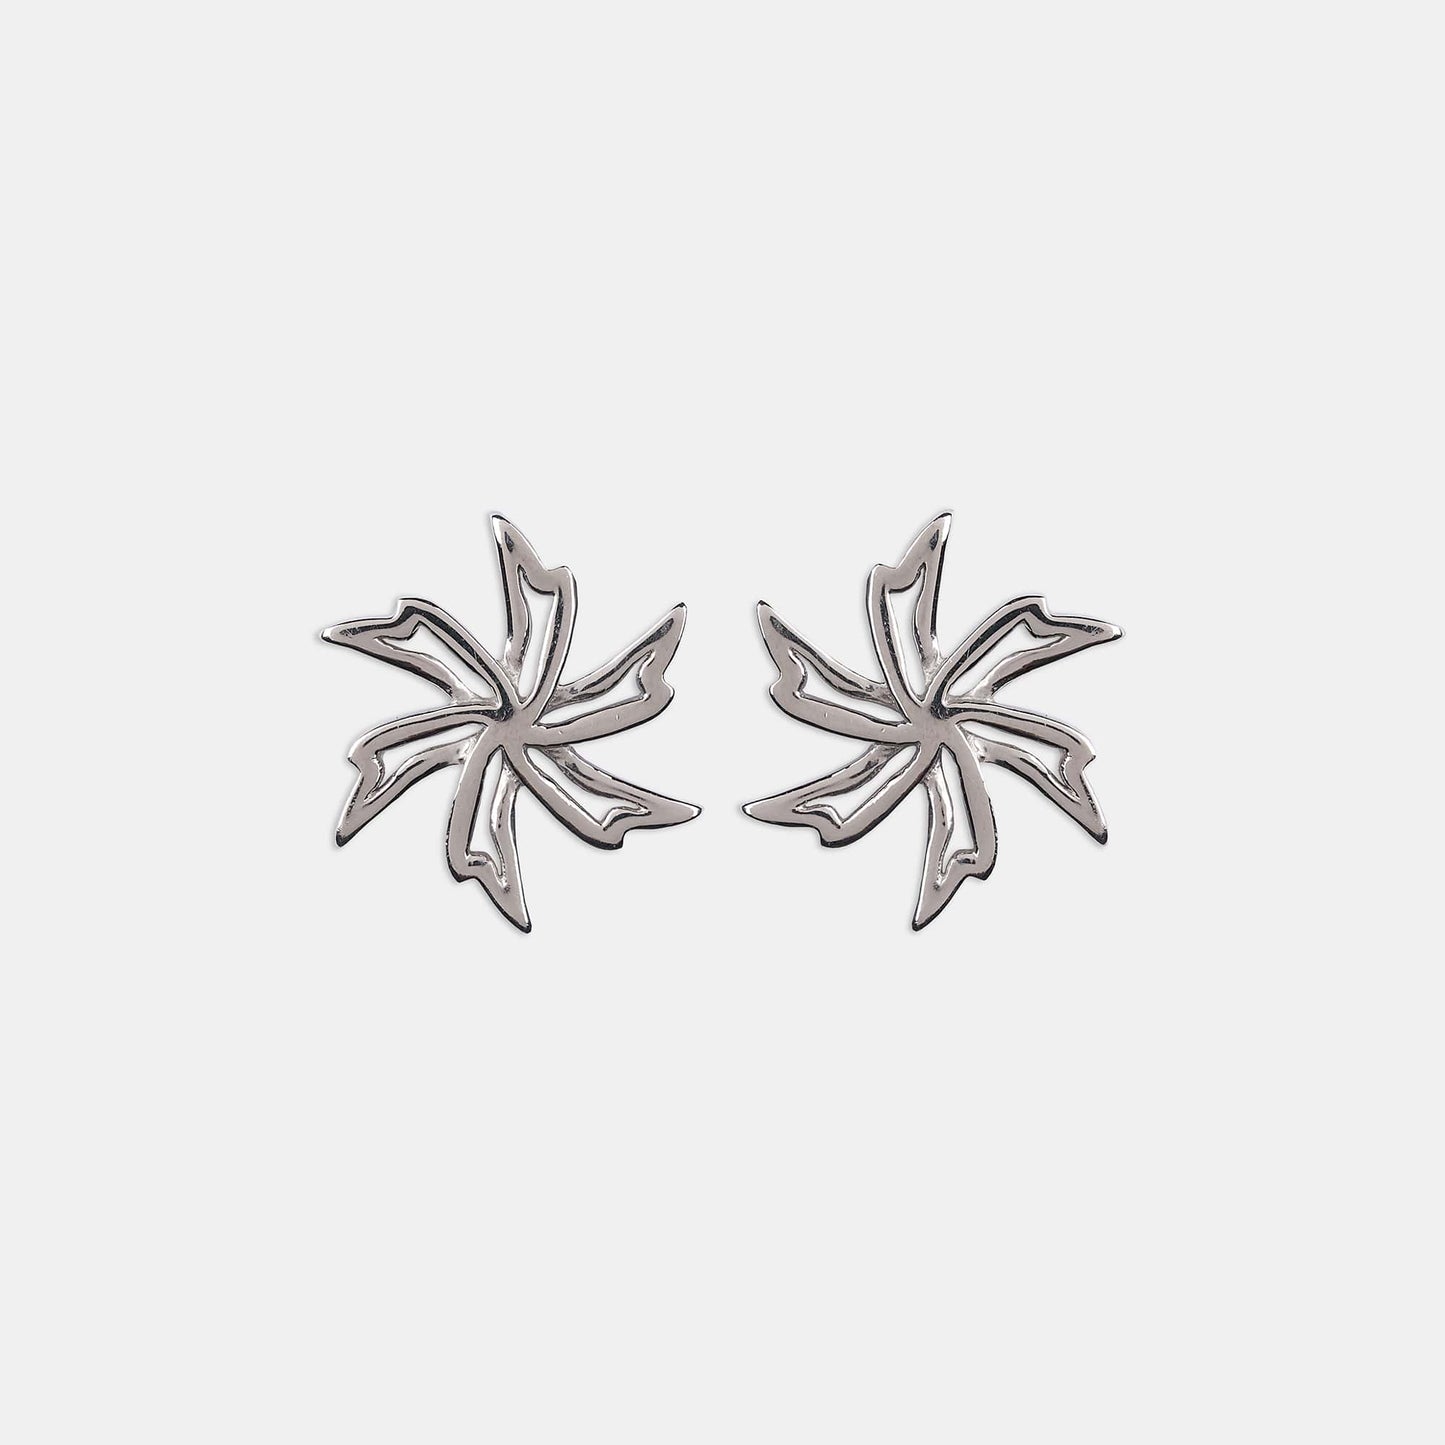 Elevate your style with these elegant silver star earrings on a pristine white background, a must-have accessory